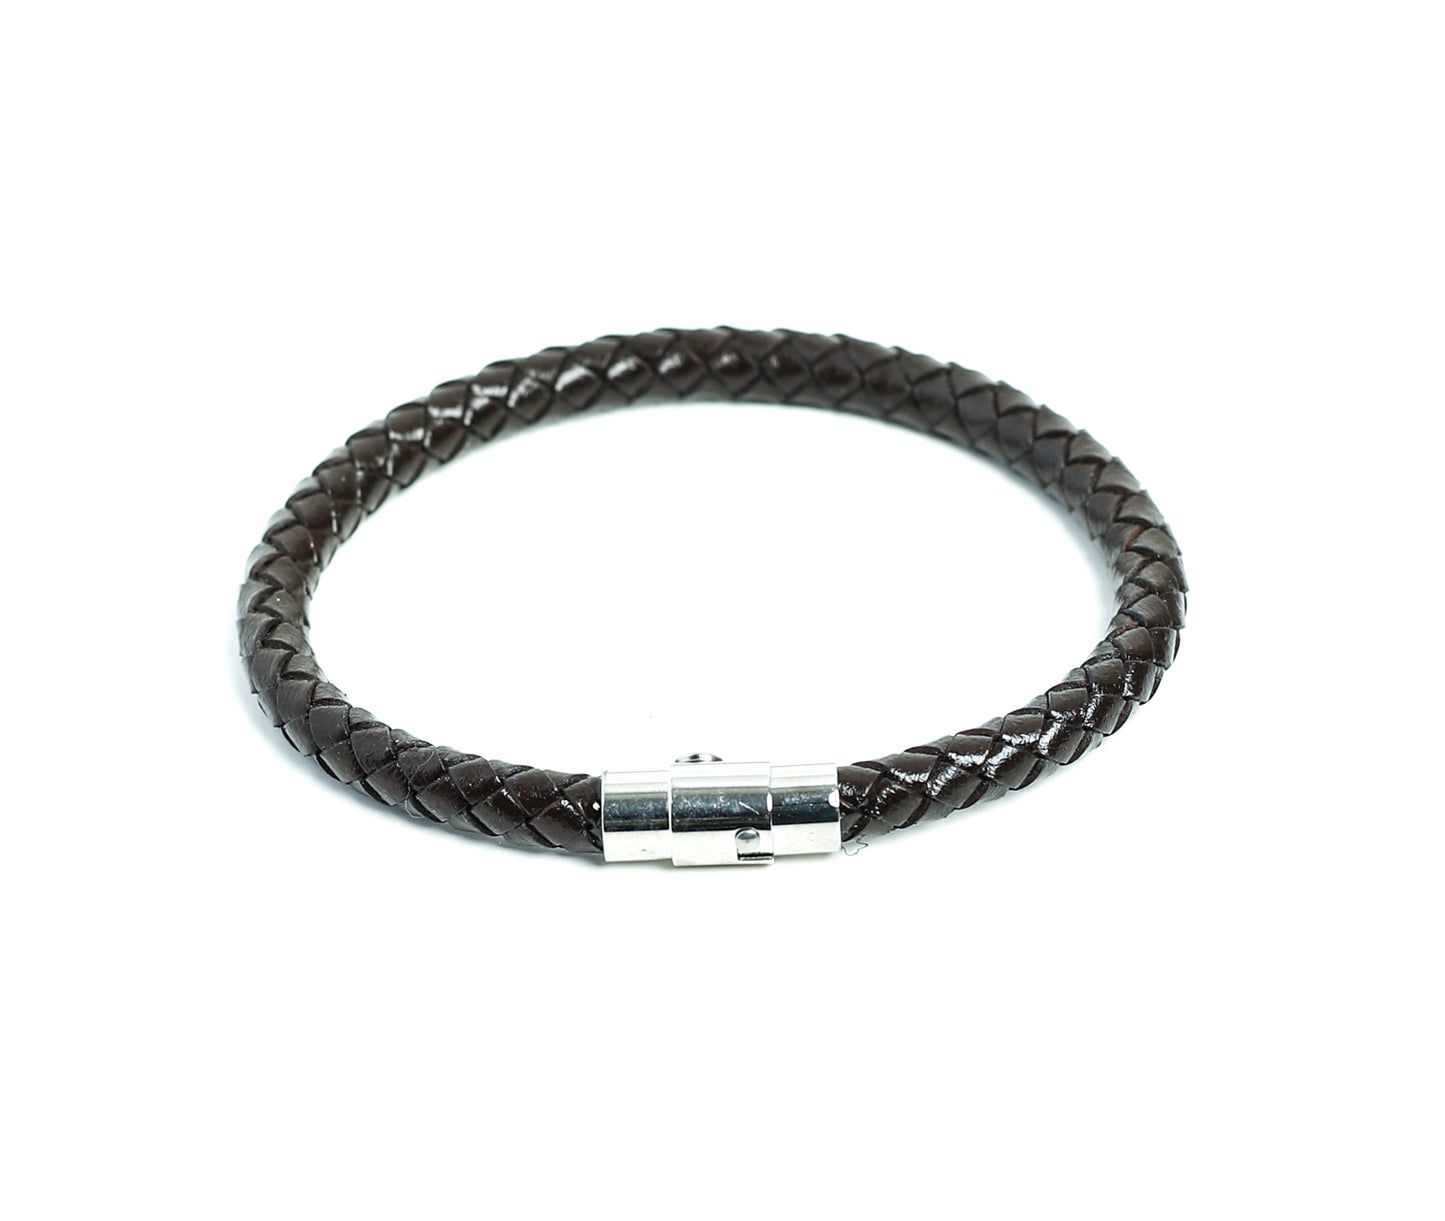 Mens Handmade Brown Premium Braided Leather Bracelet with Clasp closure at RM Kandy